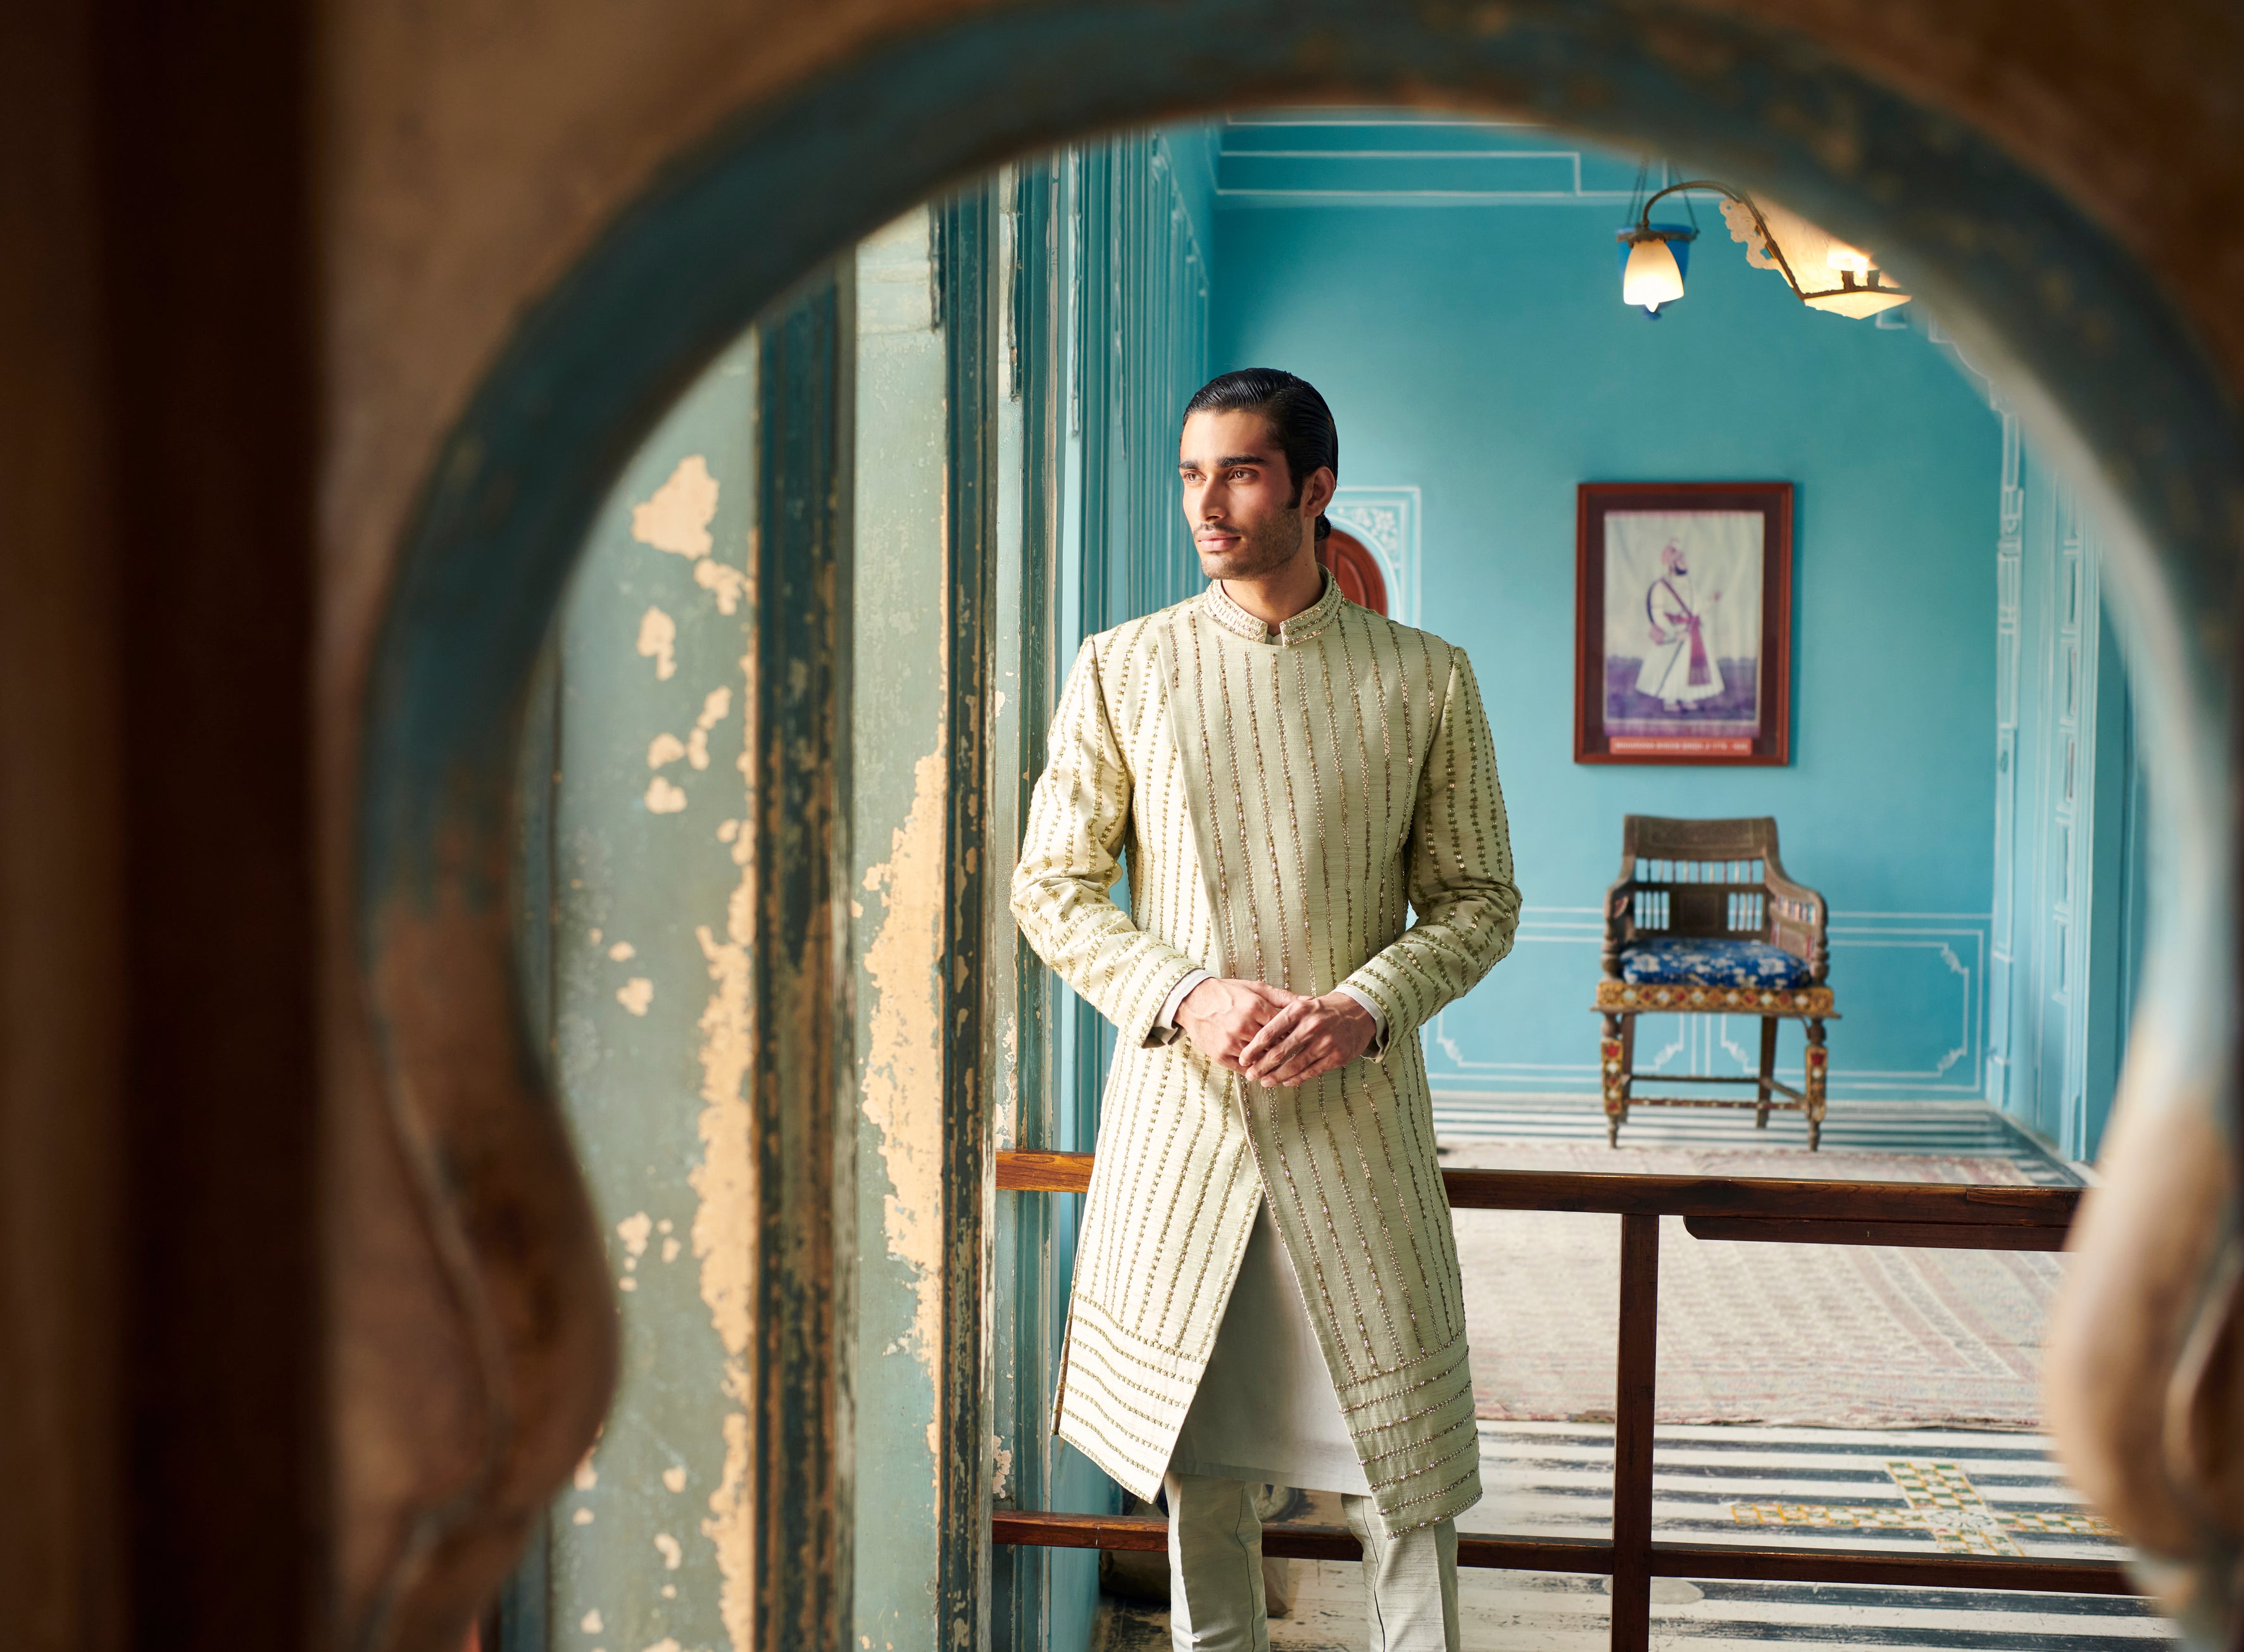 Dress to impress with our customizable Sherwani Set, featuring raw silk Sherwani, linen satin Kurta, and Pant in a serene pale olive. Elevate your style with tailored sophistication and modern flair, perfect for special occasions.